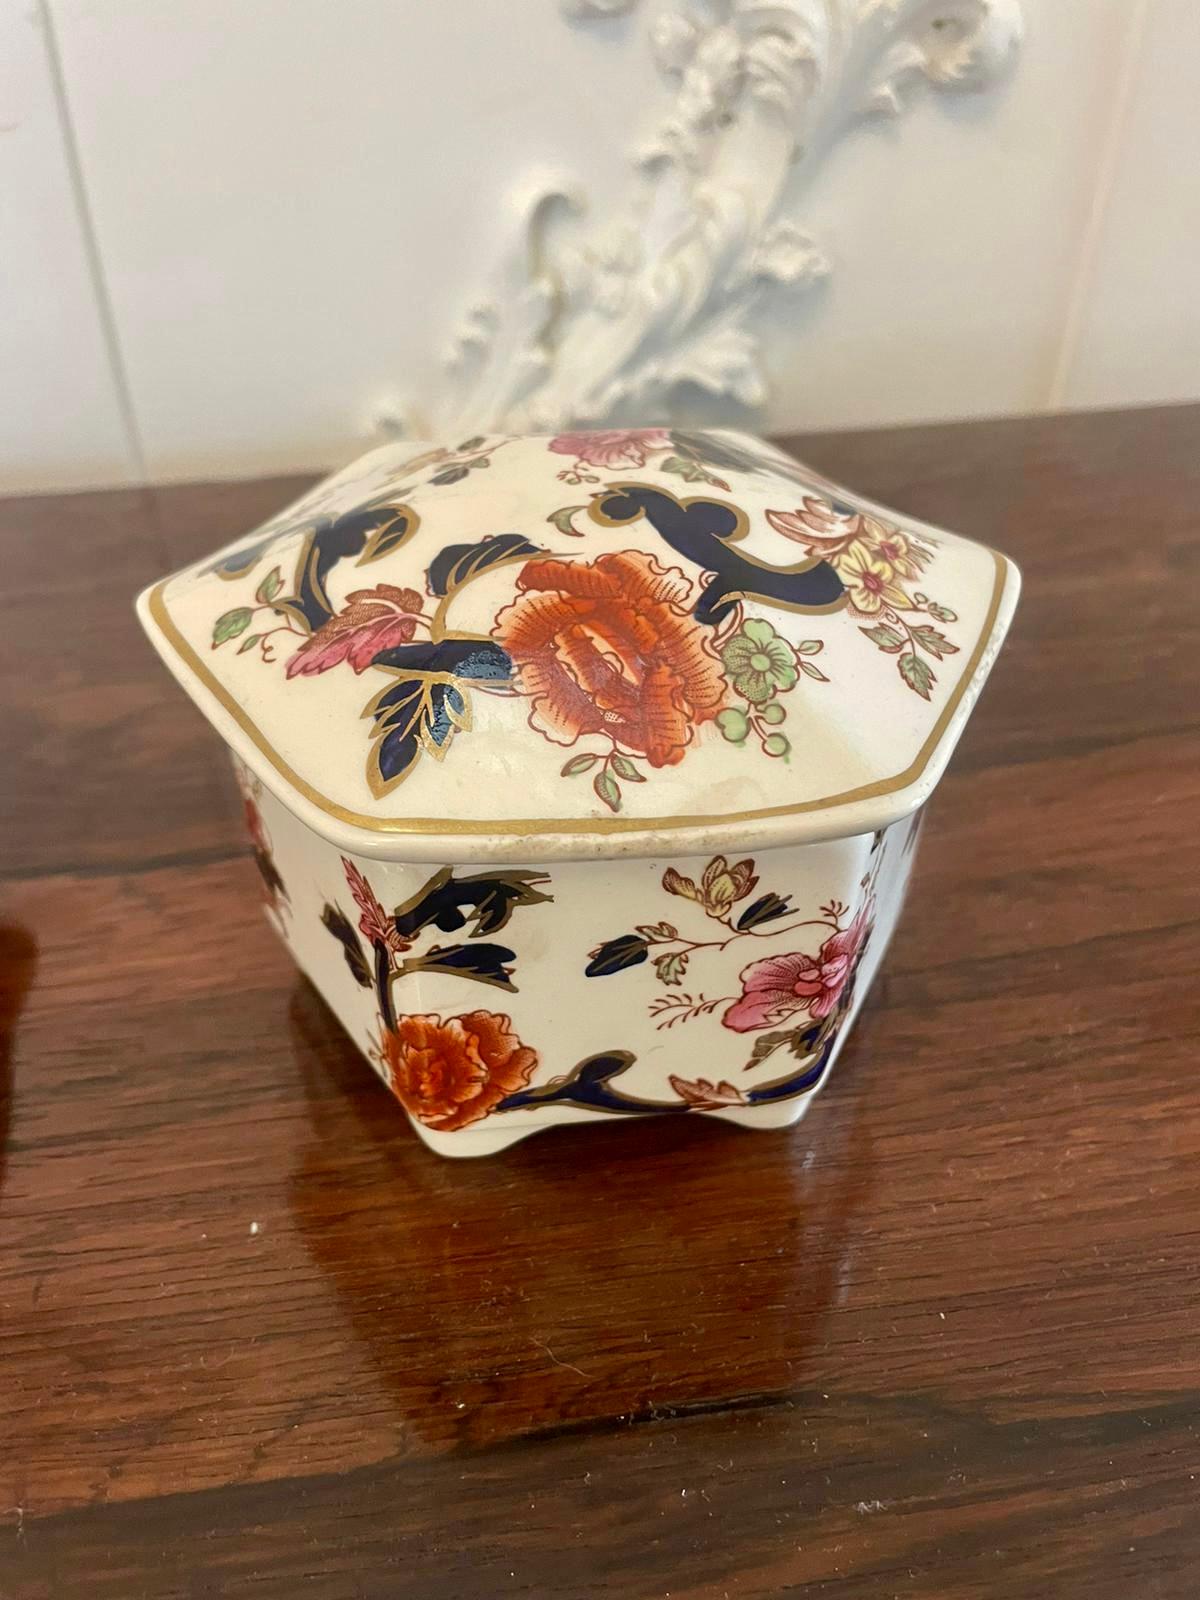 Quality pair of antique hand painted Masons Ironstone trinket boxes with fantastic quality hand painted decoration in red, pink, yellow, blue, green and gold colours 


A beautifully decorated pair in mint condition


Dimensions:
Small 
Height 6.5 x